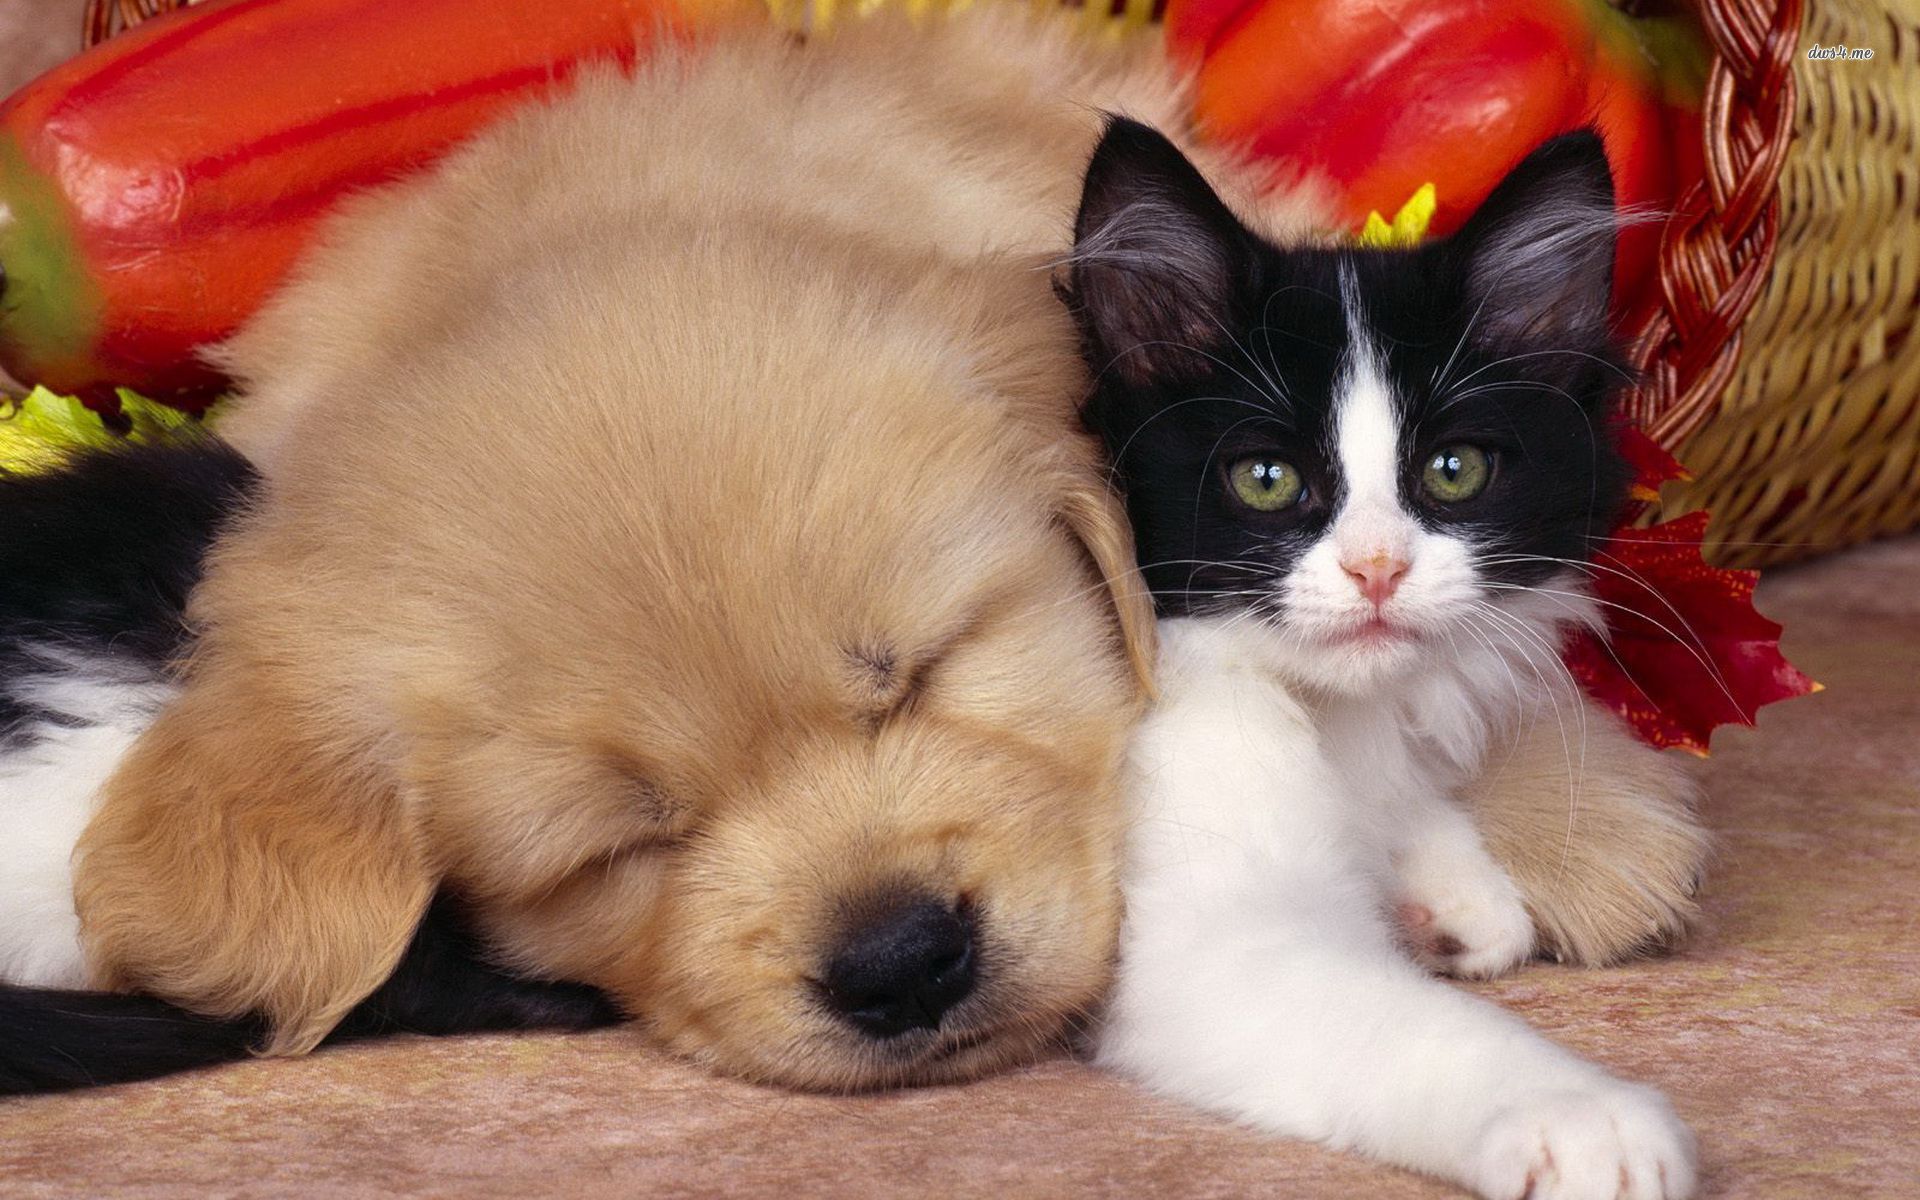 Cute Dog And Cat Hd Wallpaperjpg. Dogs And Cats Wallpaper ...